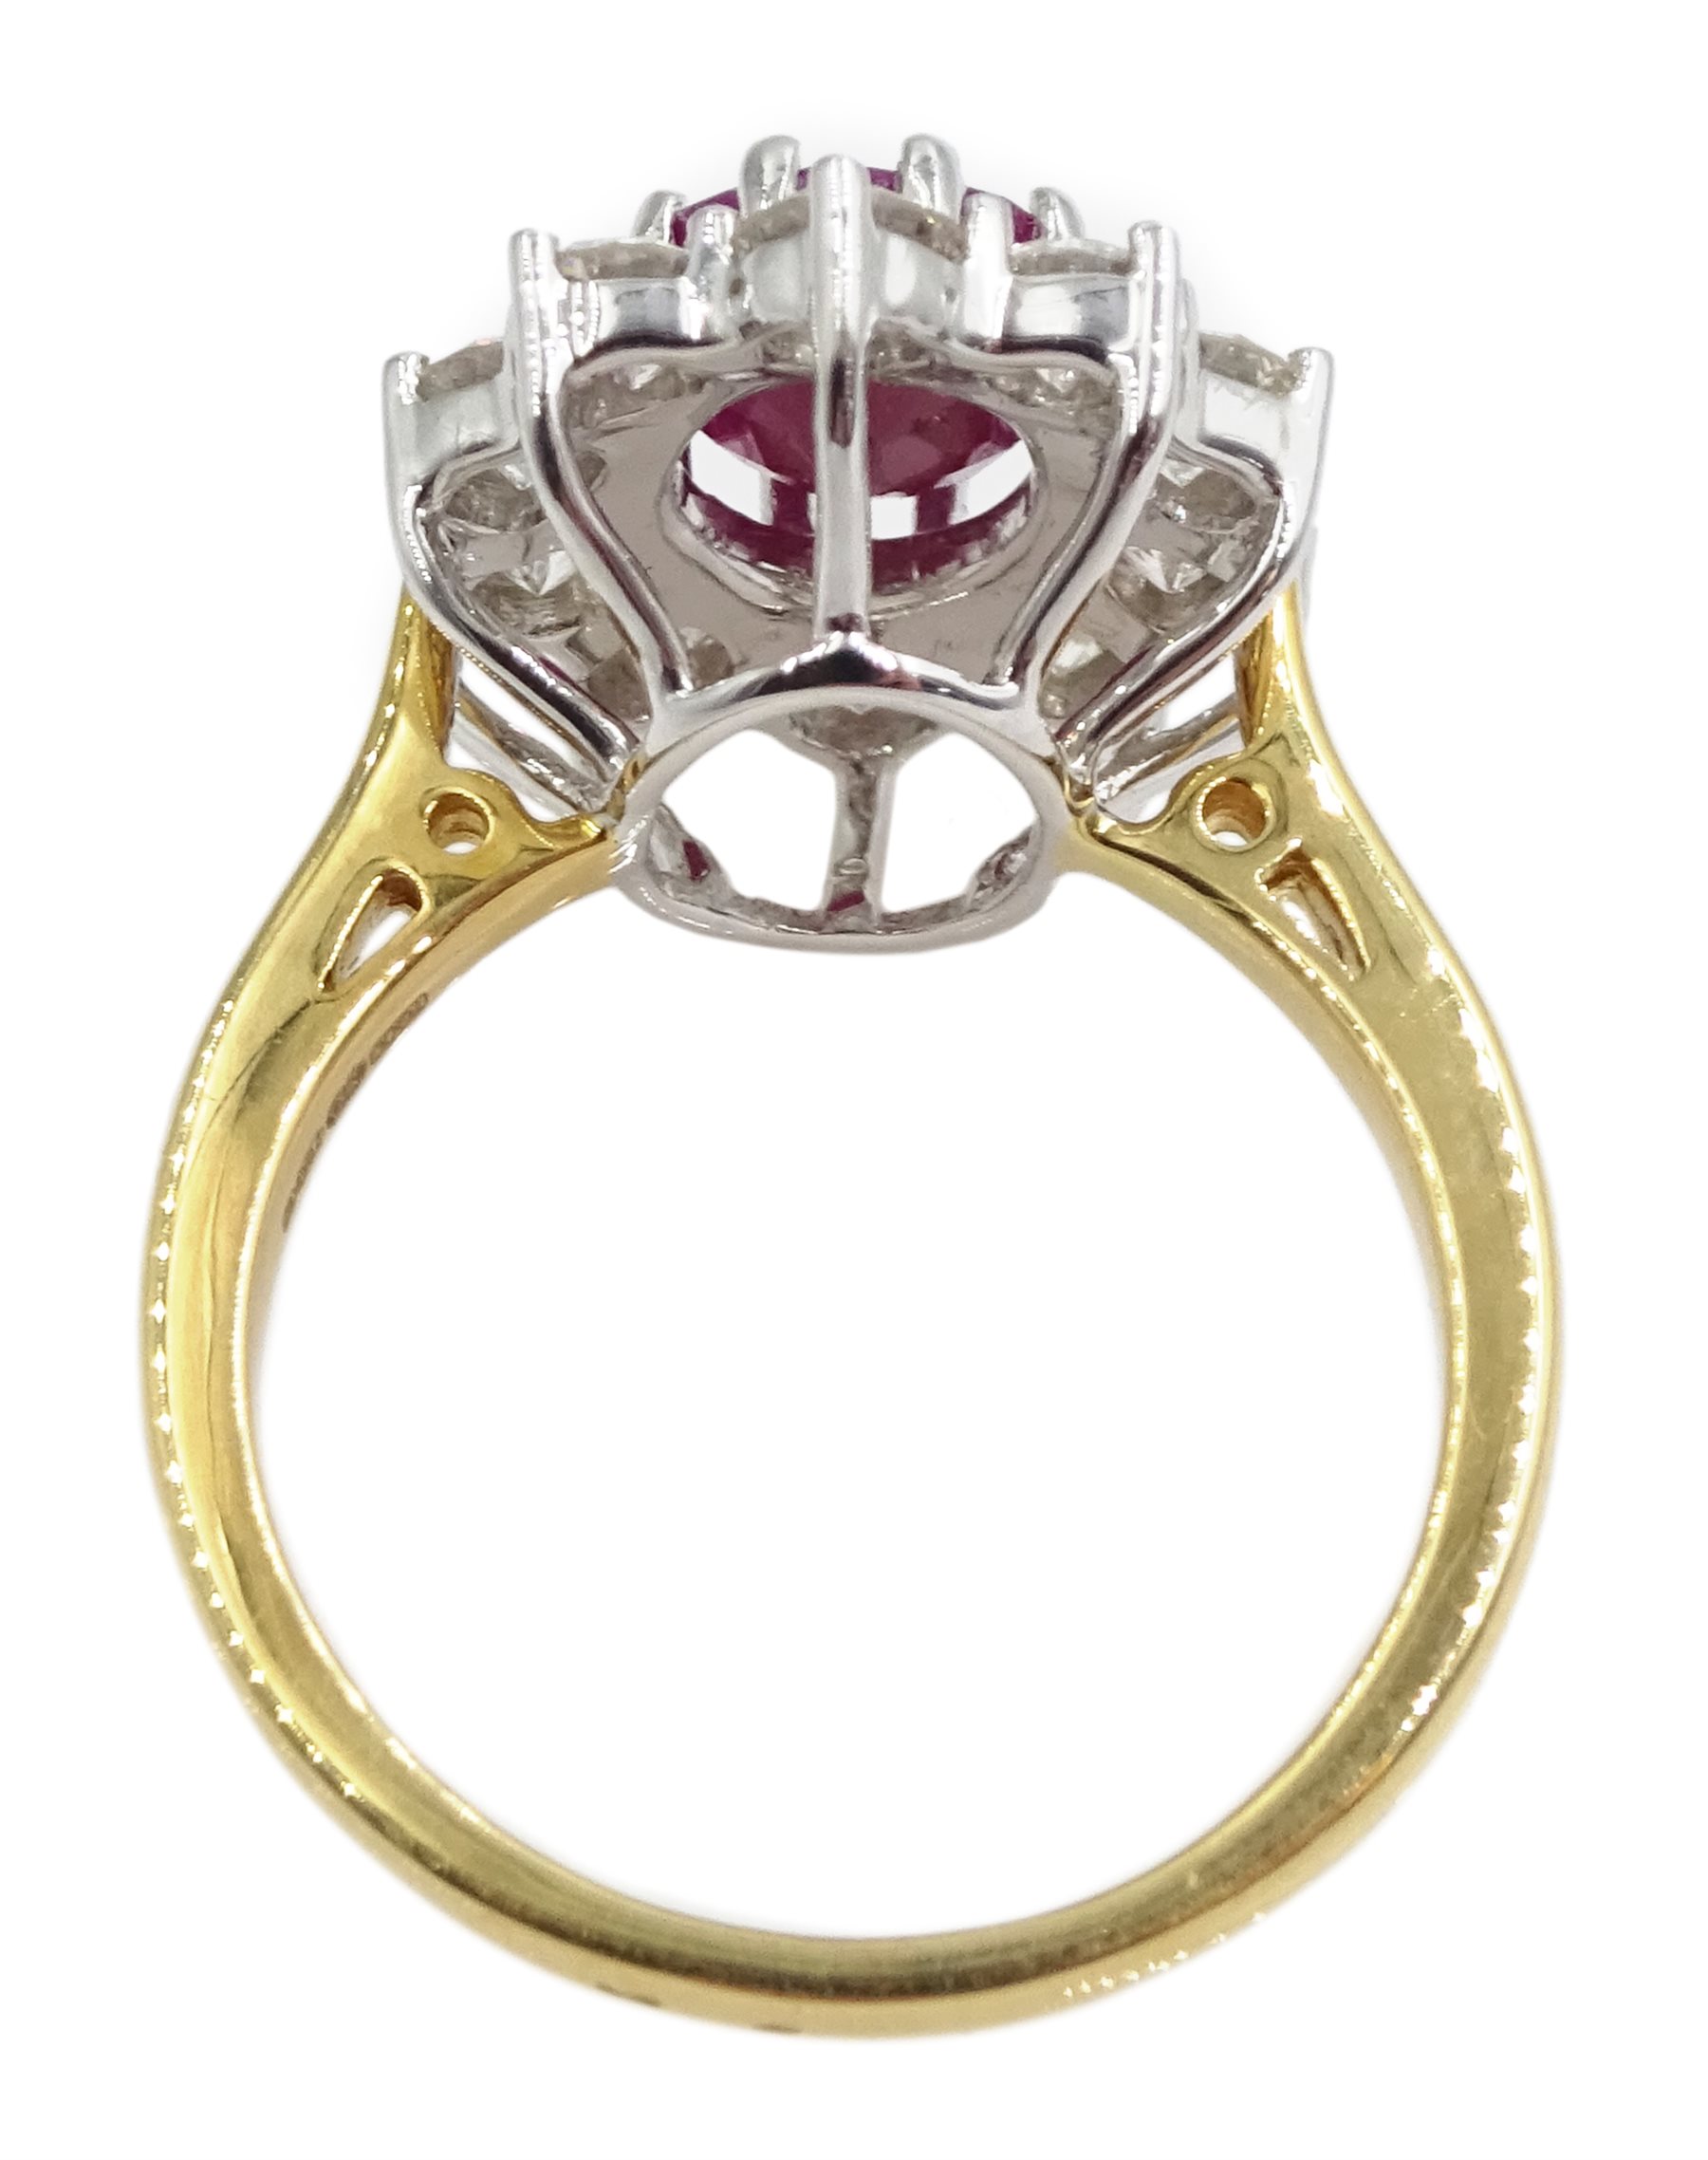 18ct gold ruby and diamond cluster ring - Image 5 of 6